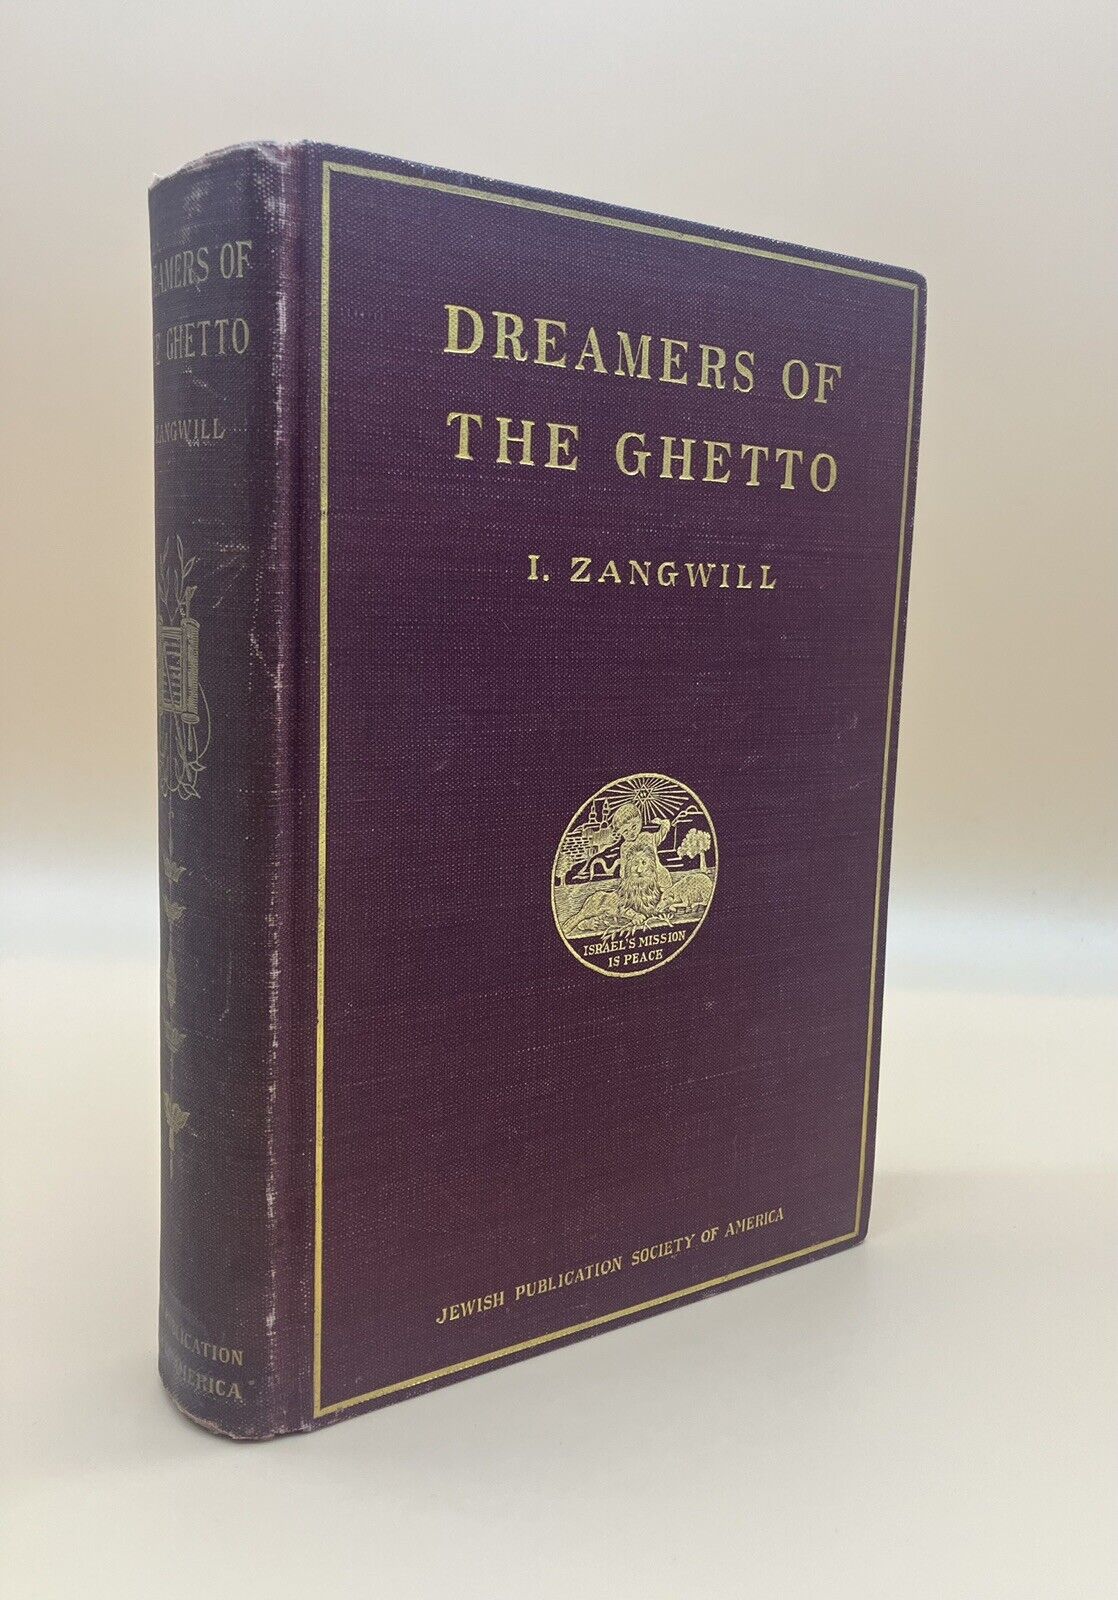 DREAMERS OF THE GHETTO  by Israel Zangwill  1898 Hardcover Jewish Publ Society